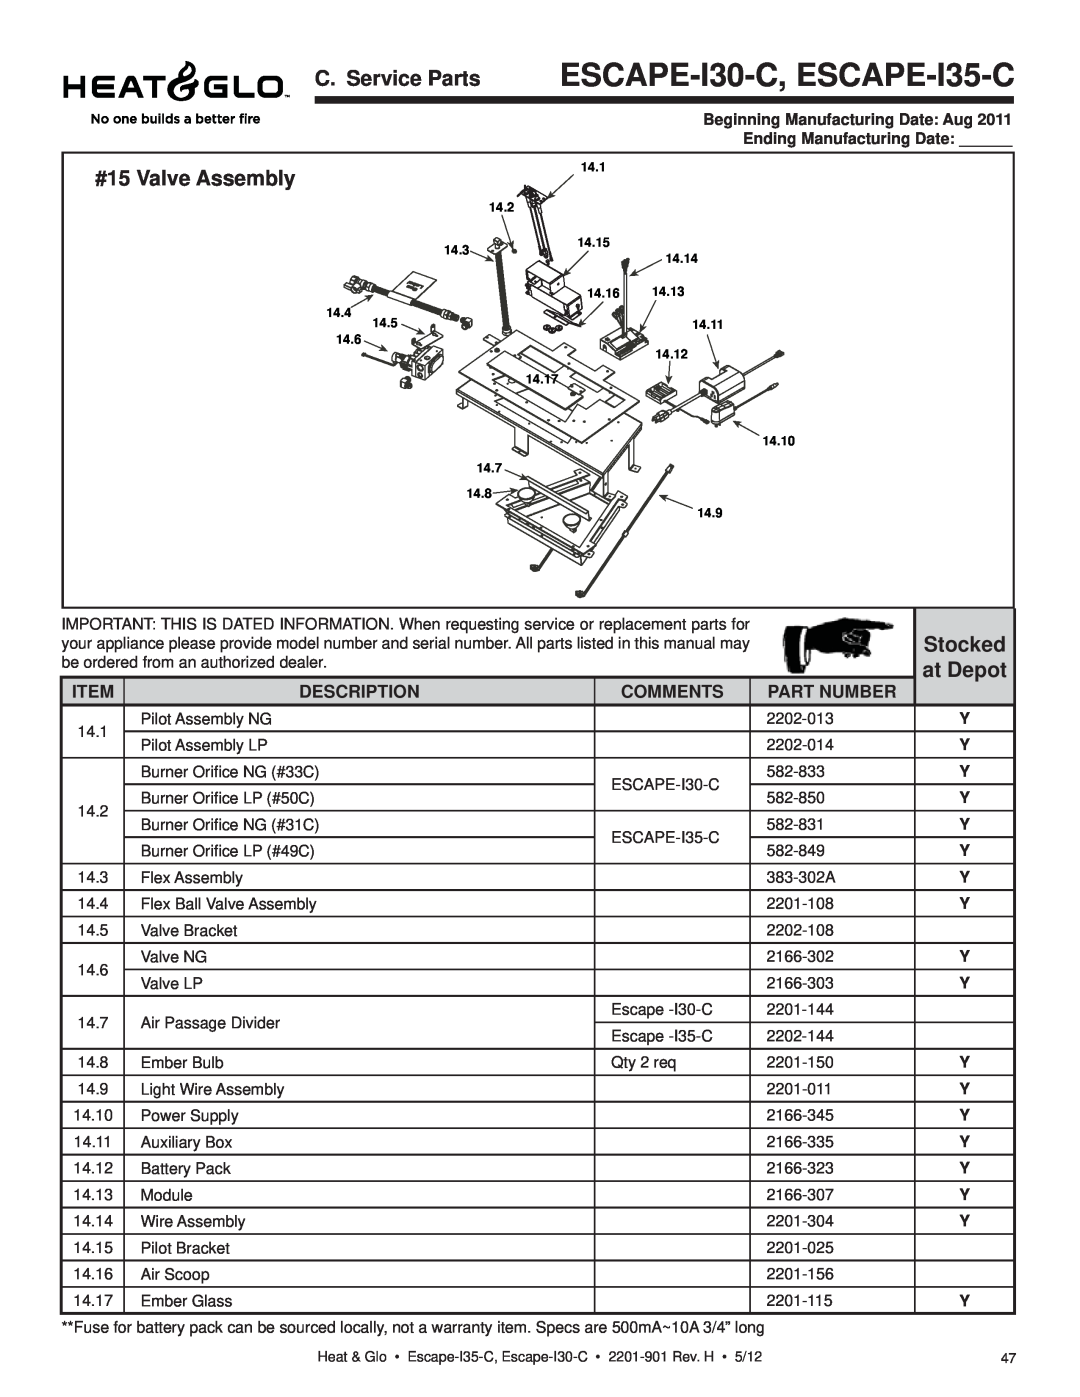 Heat & Glo LifeStyle owner manual C. Service Parts ESCAPE-I30-C, ESCAPE-I35-C, #15 Valve Assembly, at Depot, Stocked 